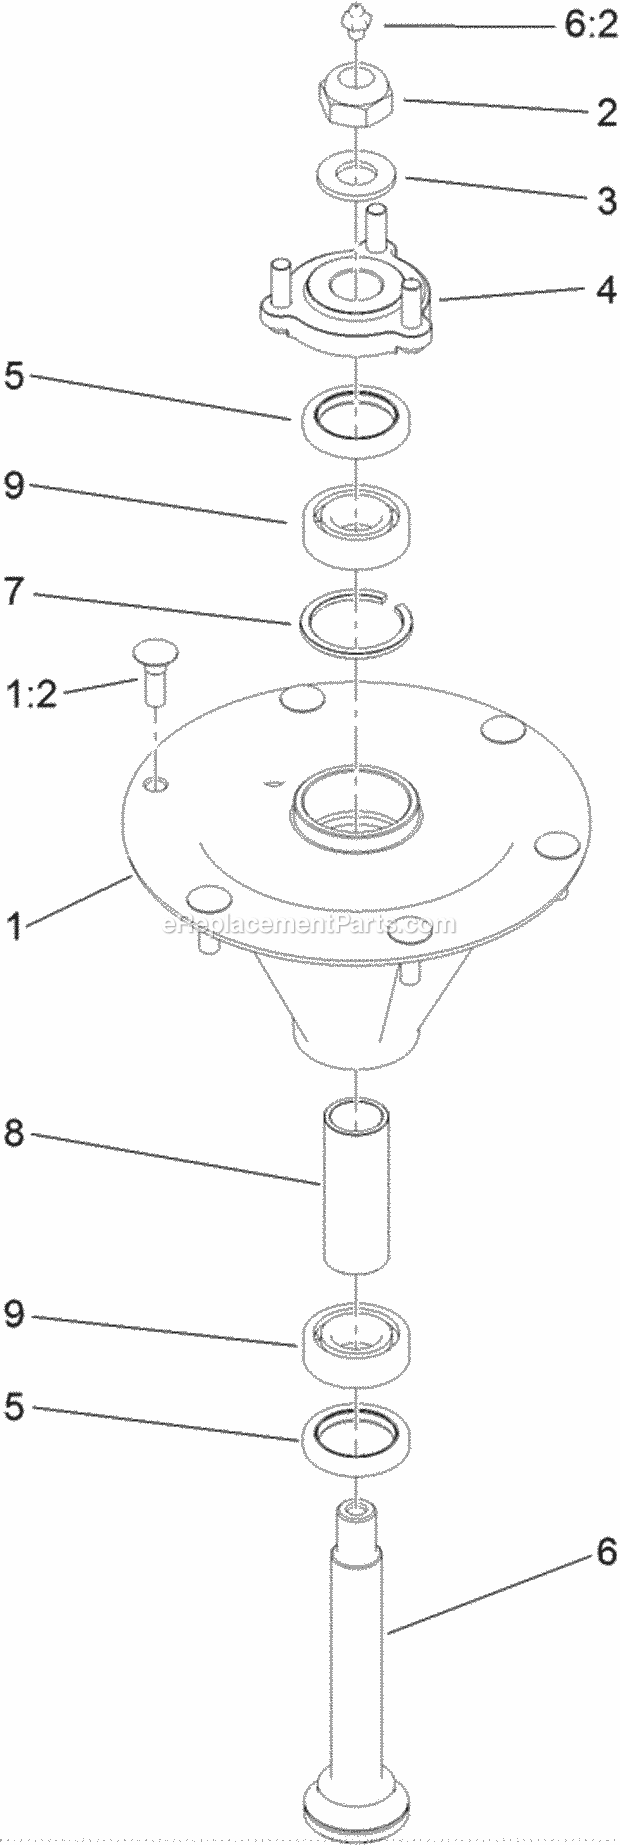 Toro 74925TE (312000001-312999999) Z Master Professional 6000 Series Riding Mower, With 152cm Turbo Force Side Discharge Mower, Spindle Assembly No. 119-8560 Diagram